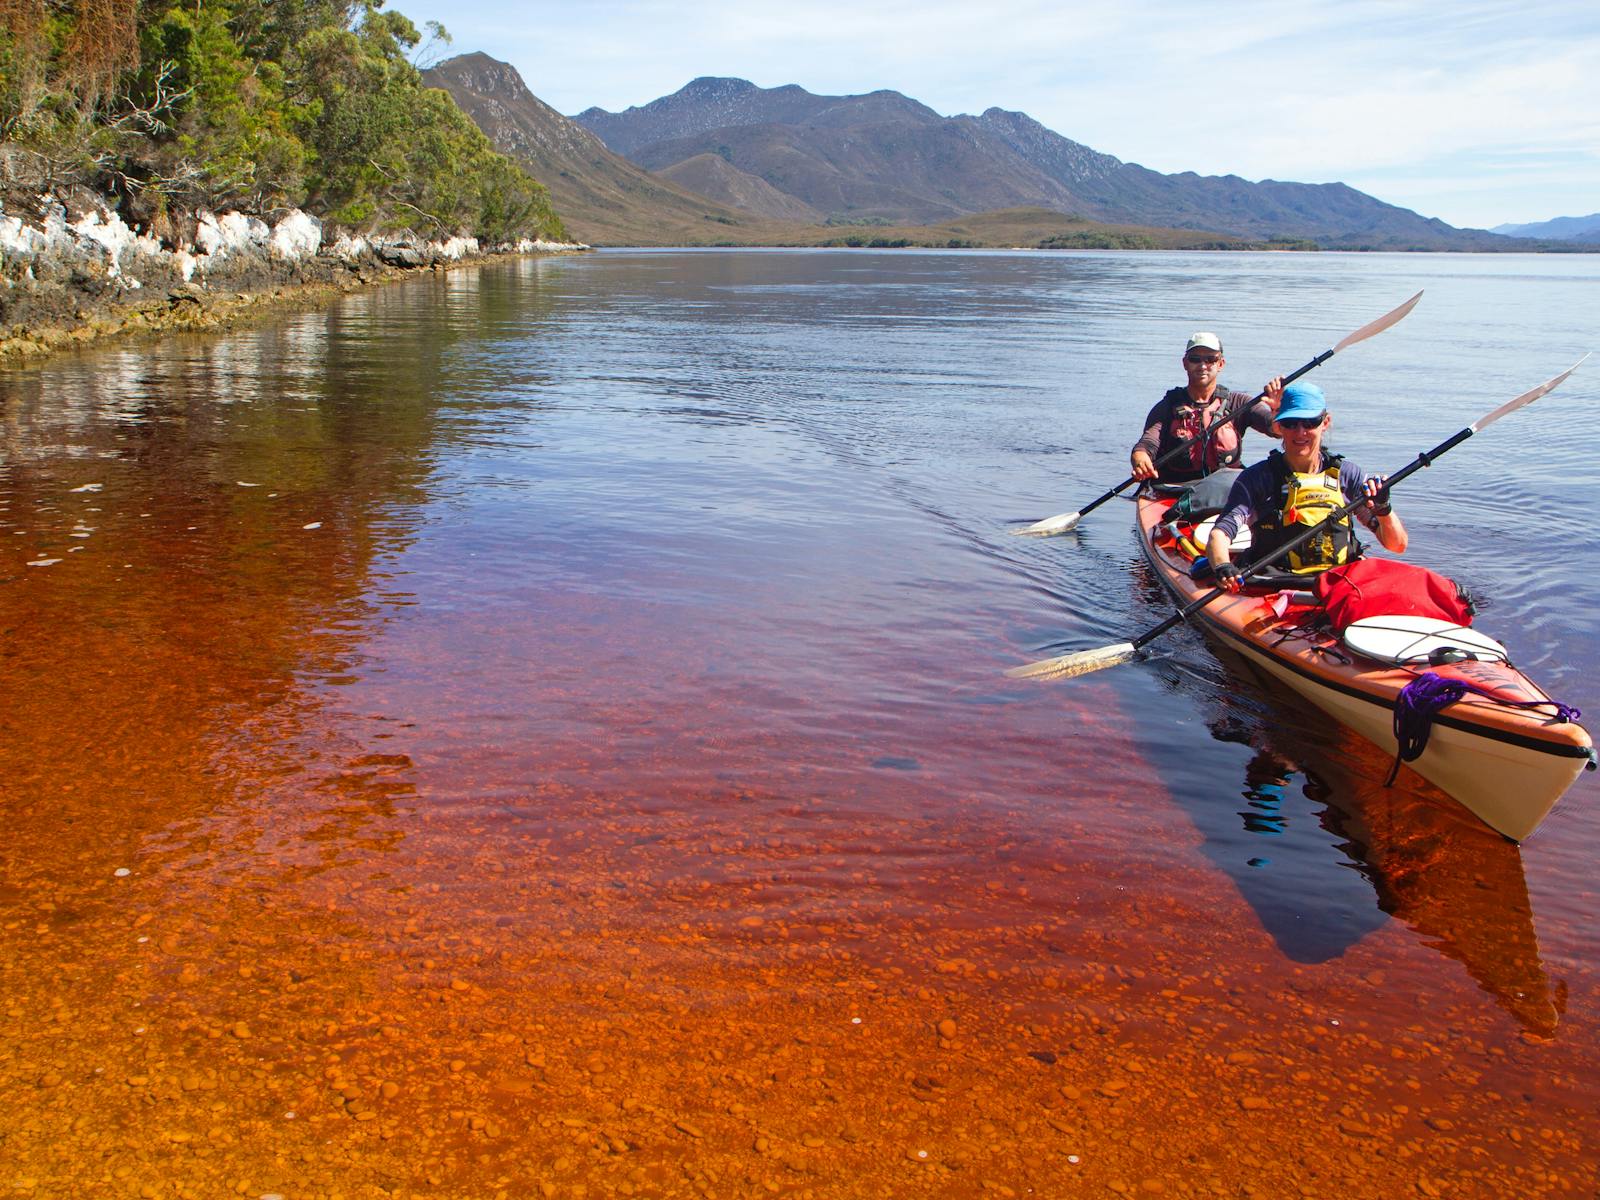 Kayaking on the tanin stained waters of Bathurst Harbour